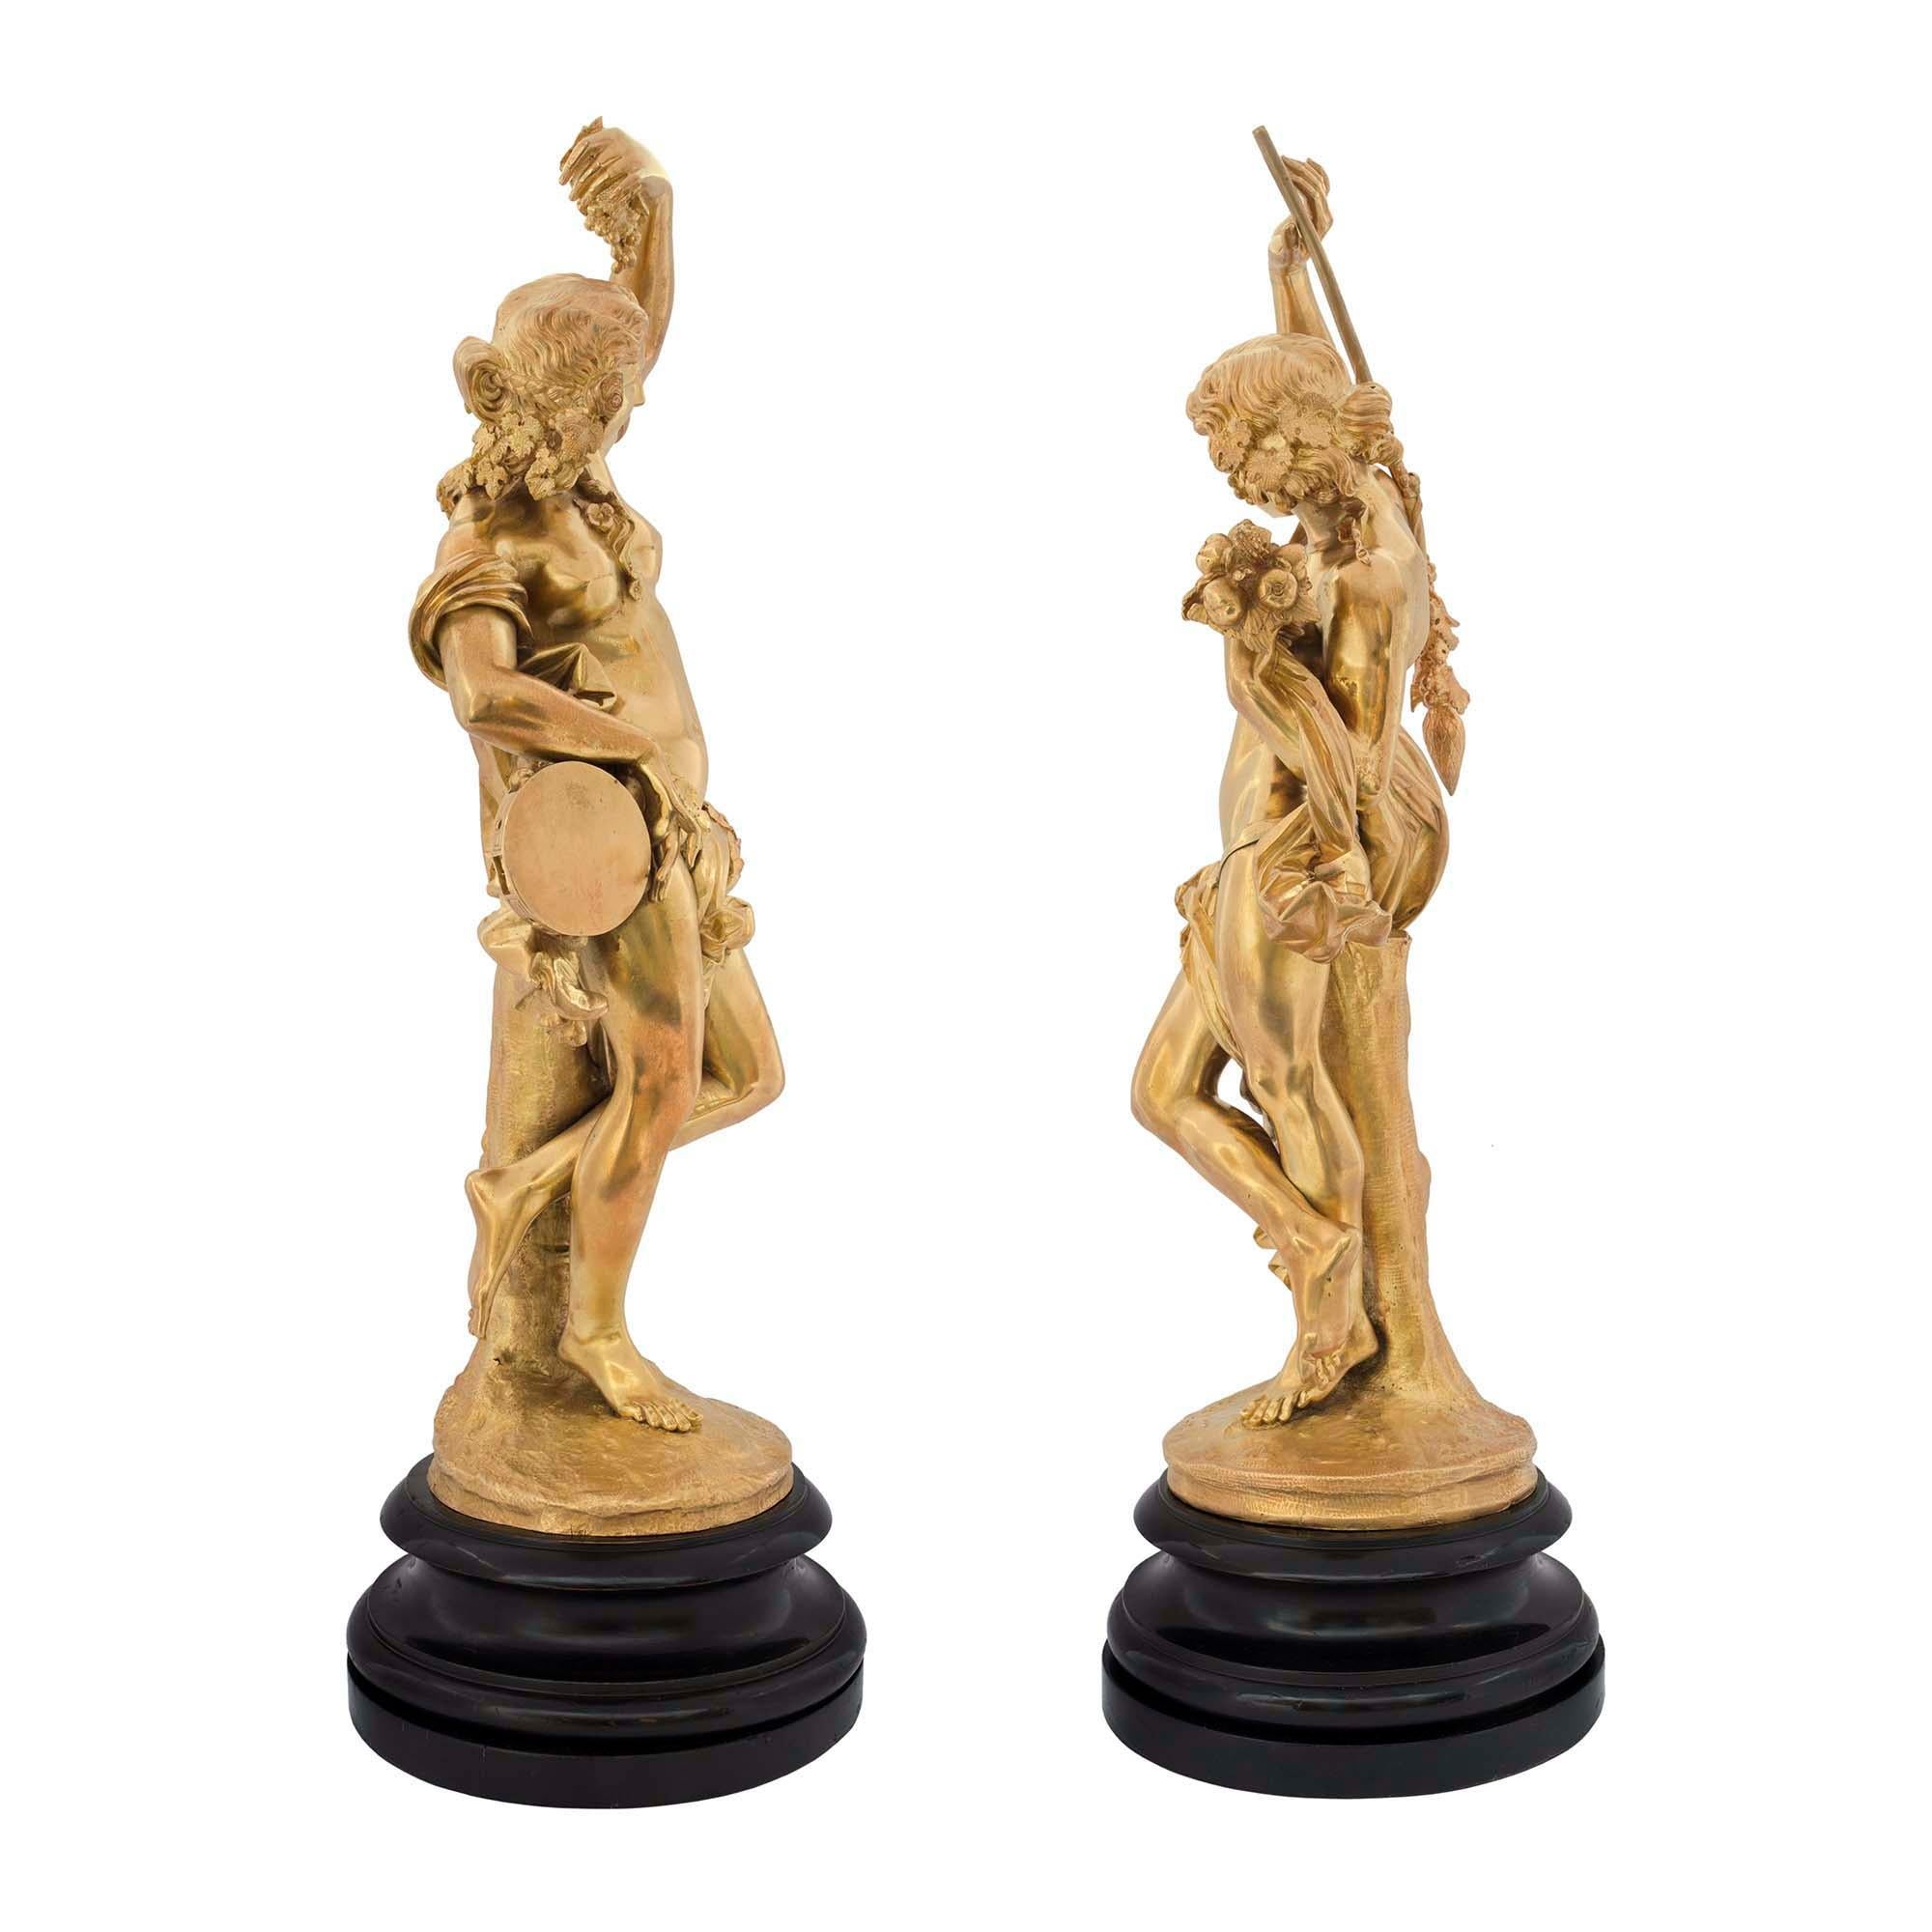 A most impressive and nicely scaled pair of French Louis XVI st. ormolu festive figural statues, signed Devaulx. On the left she is leaning on a tree stump, draped in a flowing garment with a tambourine in one hand and a cluster of grapes in the